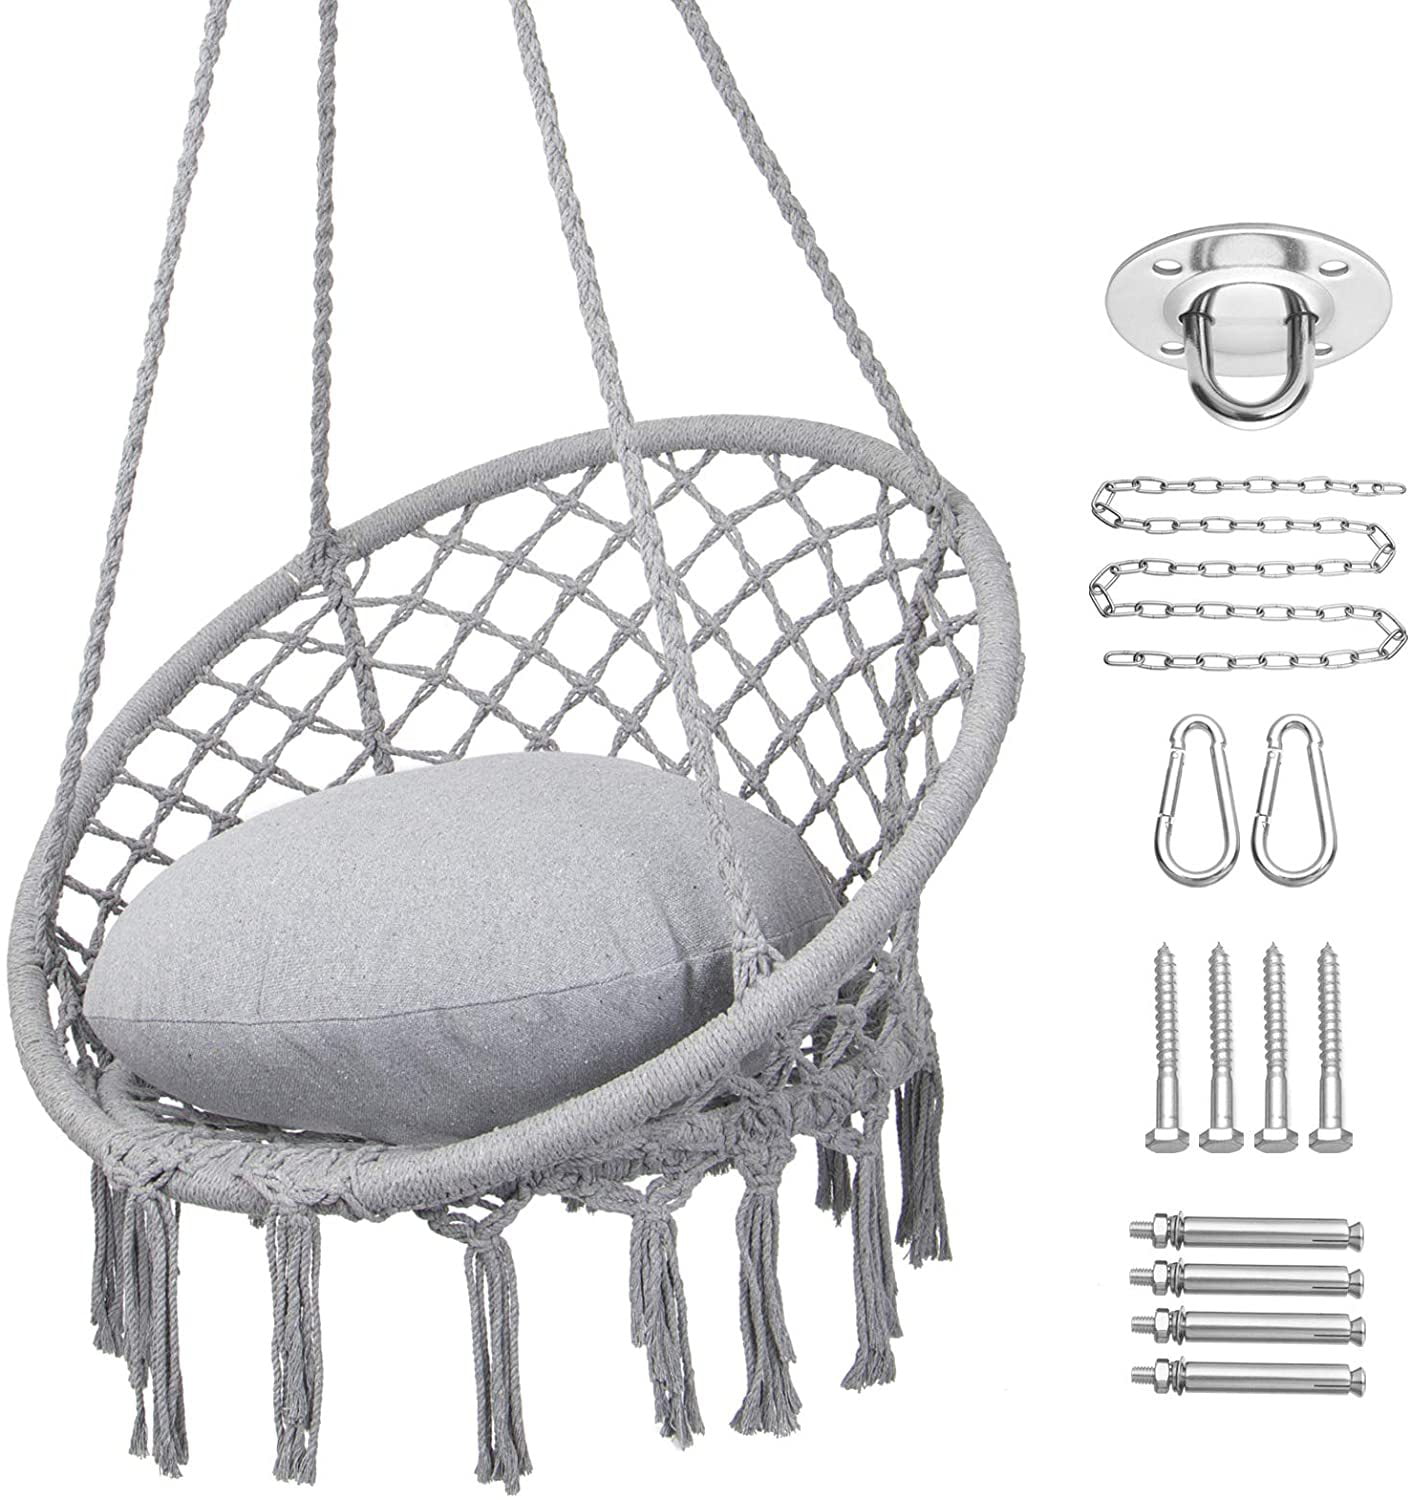 Backyard and Deck 2 Pillows Included Max 330 Lbs Beige Hanging Chair with Pocket and Macrame HBlife Hammock Chair Swing Rope Chair for Bedroom 